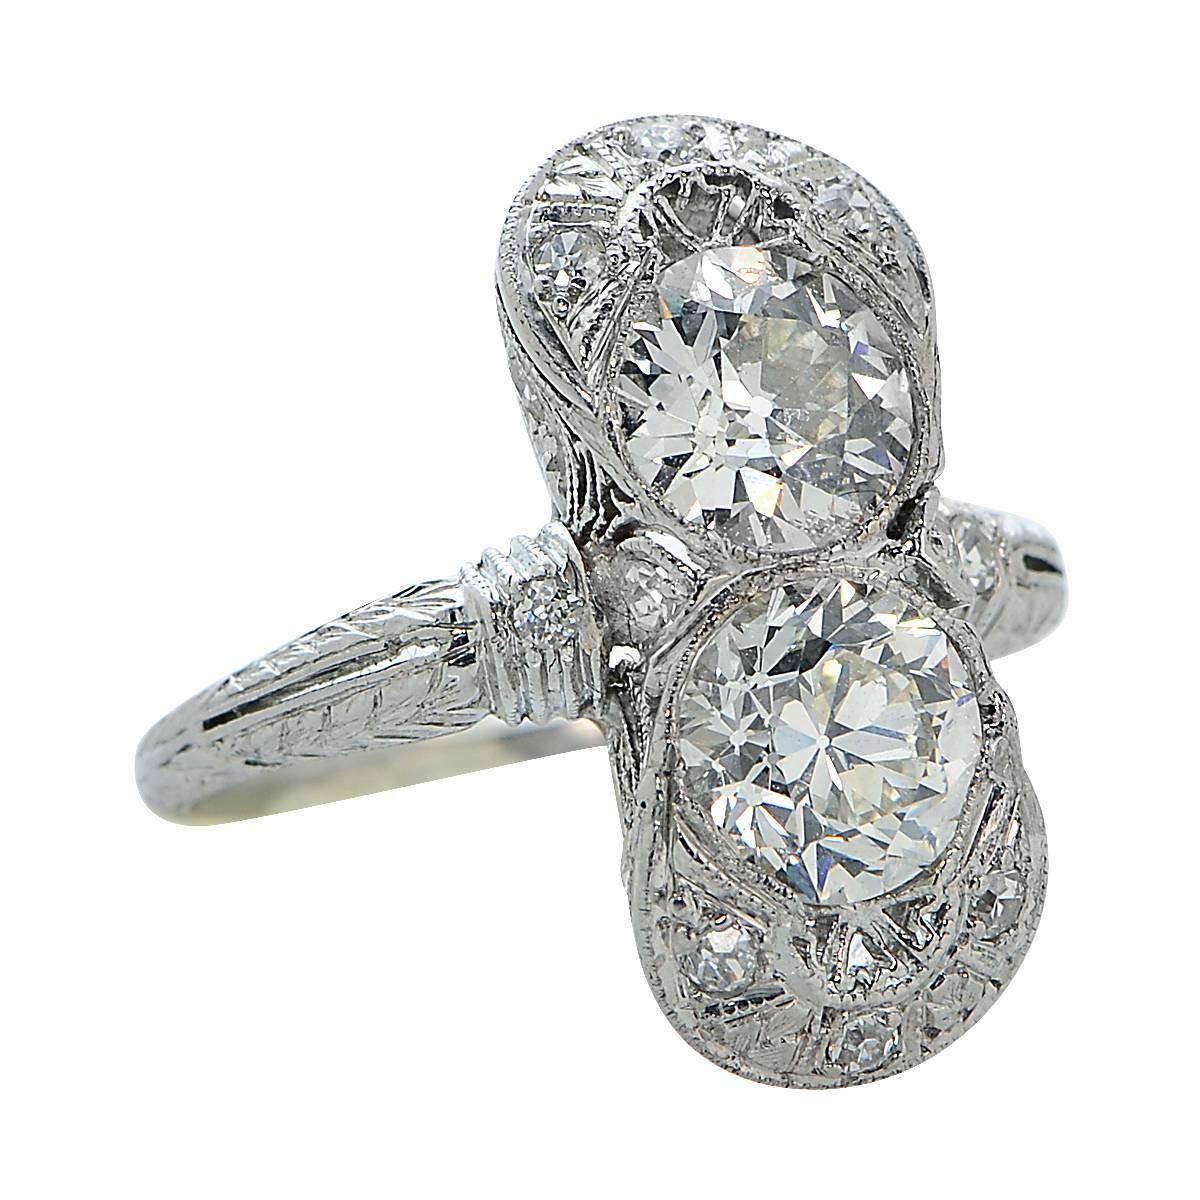 Spectacular Art Deco ring crafted in platinum, showcasing 2 Old European Cut Diamonds Weighing approximately 2.00 carats total, detailed with milgrain and filigree. This beautiful ring is a size 5.5 and weighs 5.28 grams.  

Our pieces are all